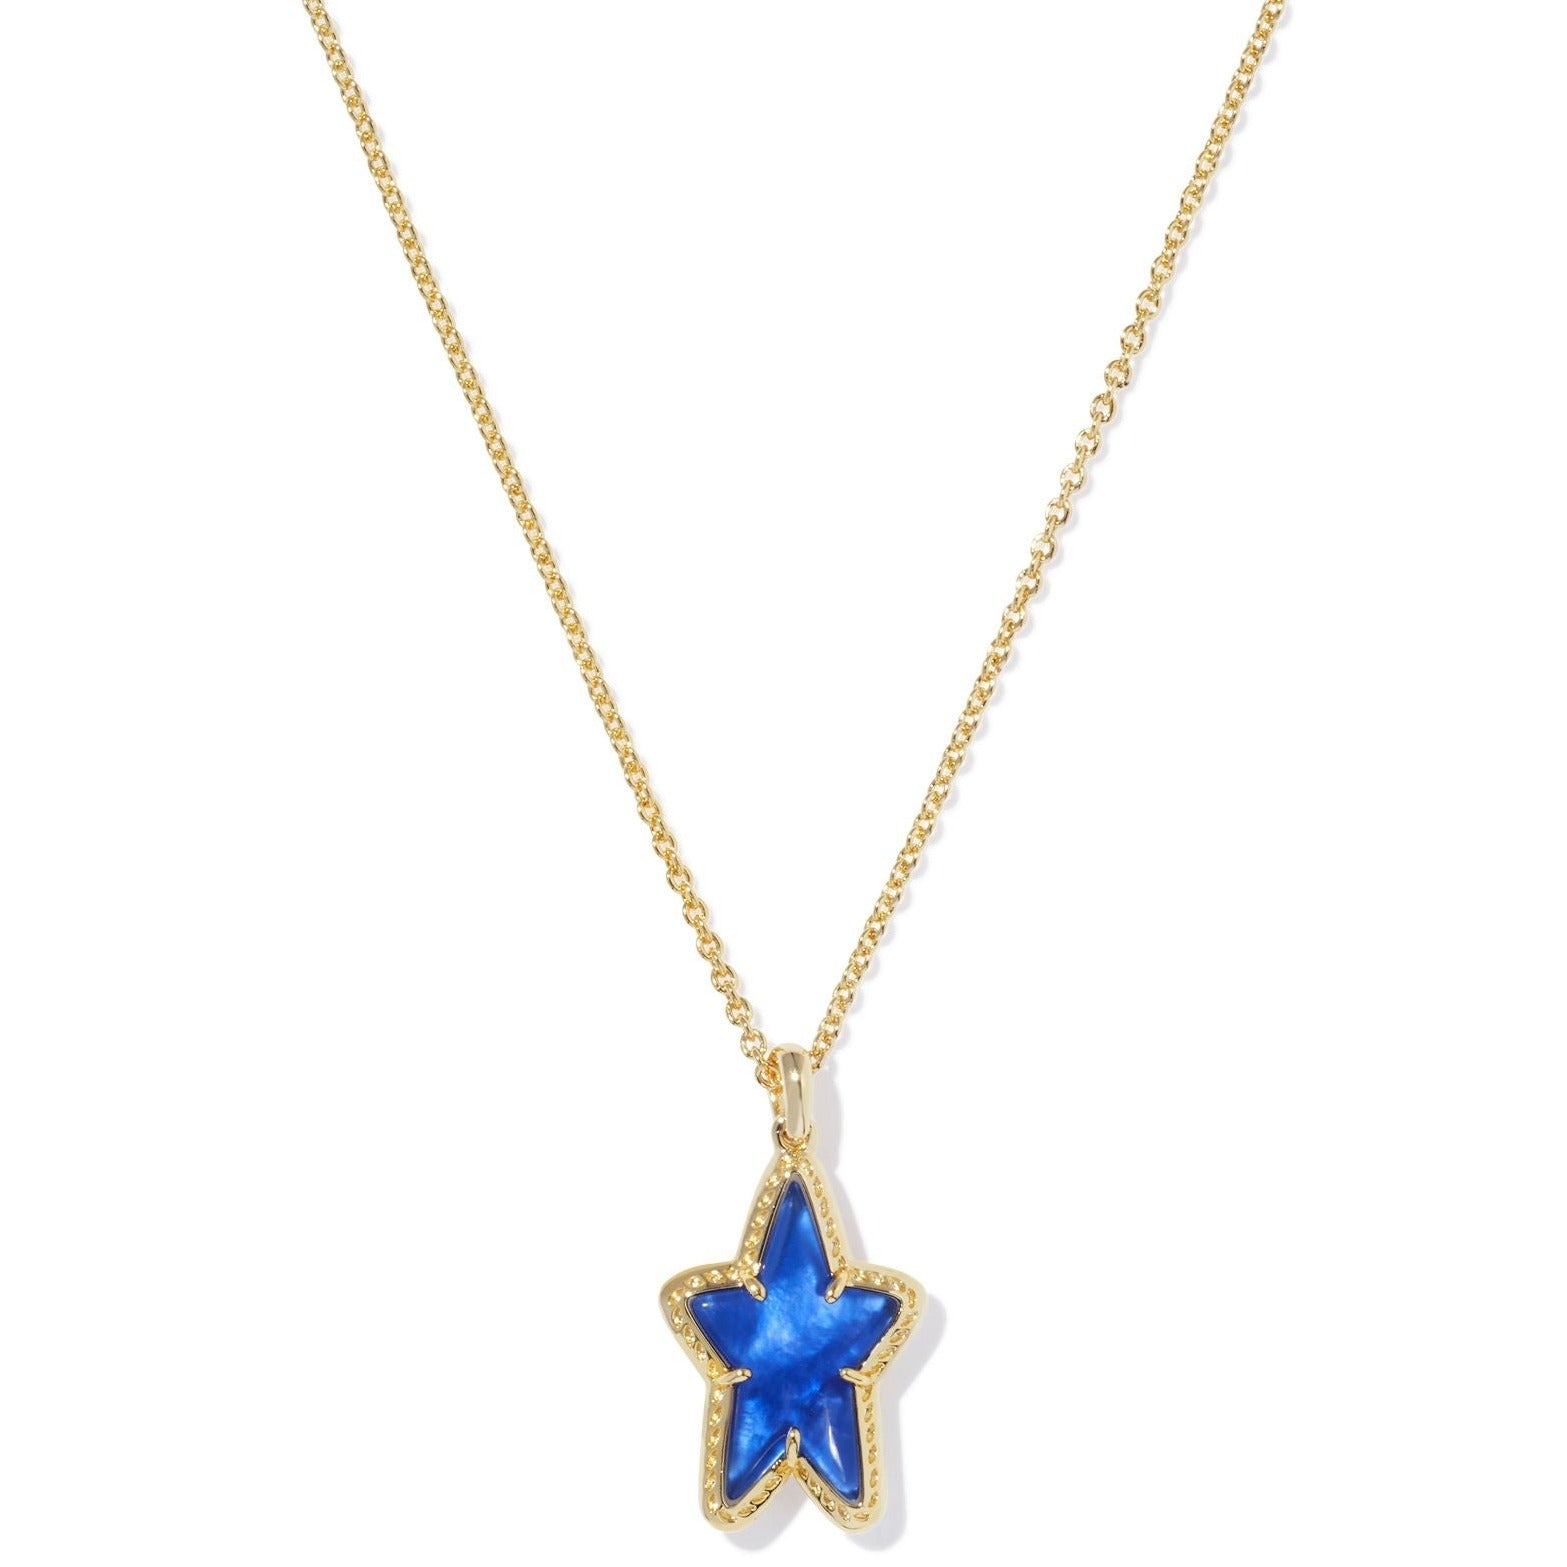 Kendra Scott | Ada Gold Star Short Pendant Necklace in Cobalt Blue Illusion - Giddy Up Glamour Boutique